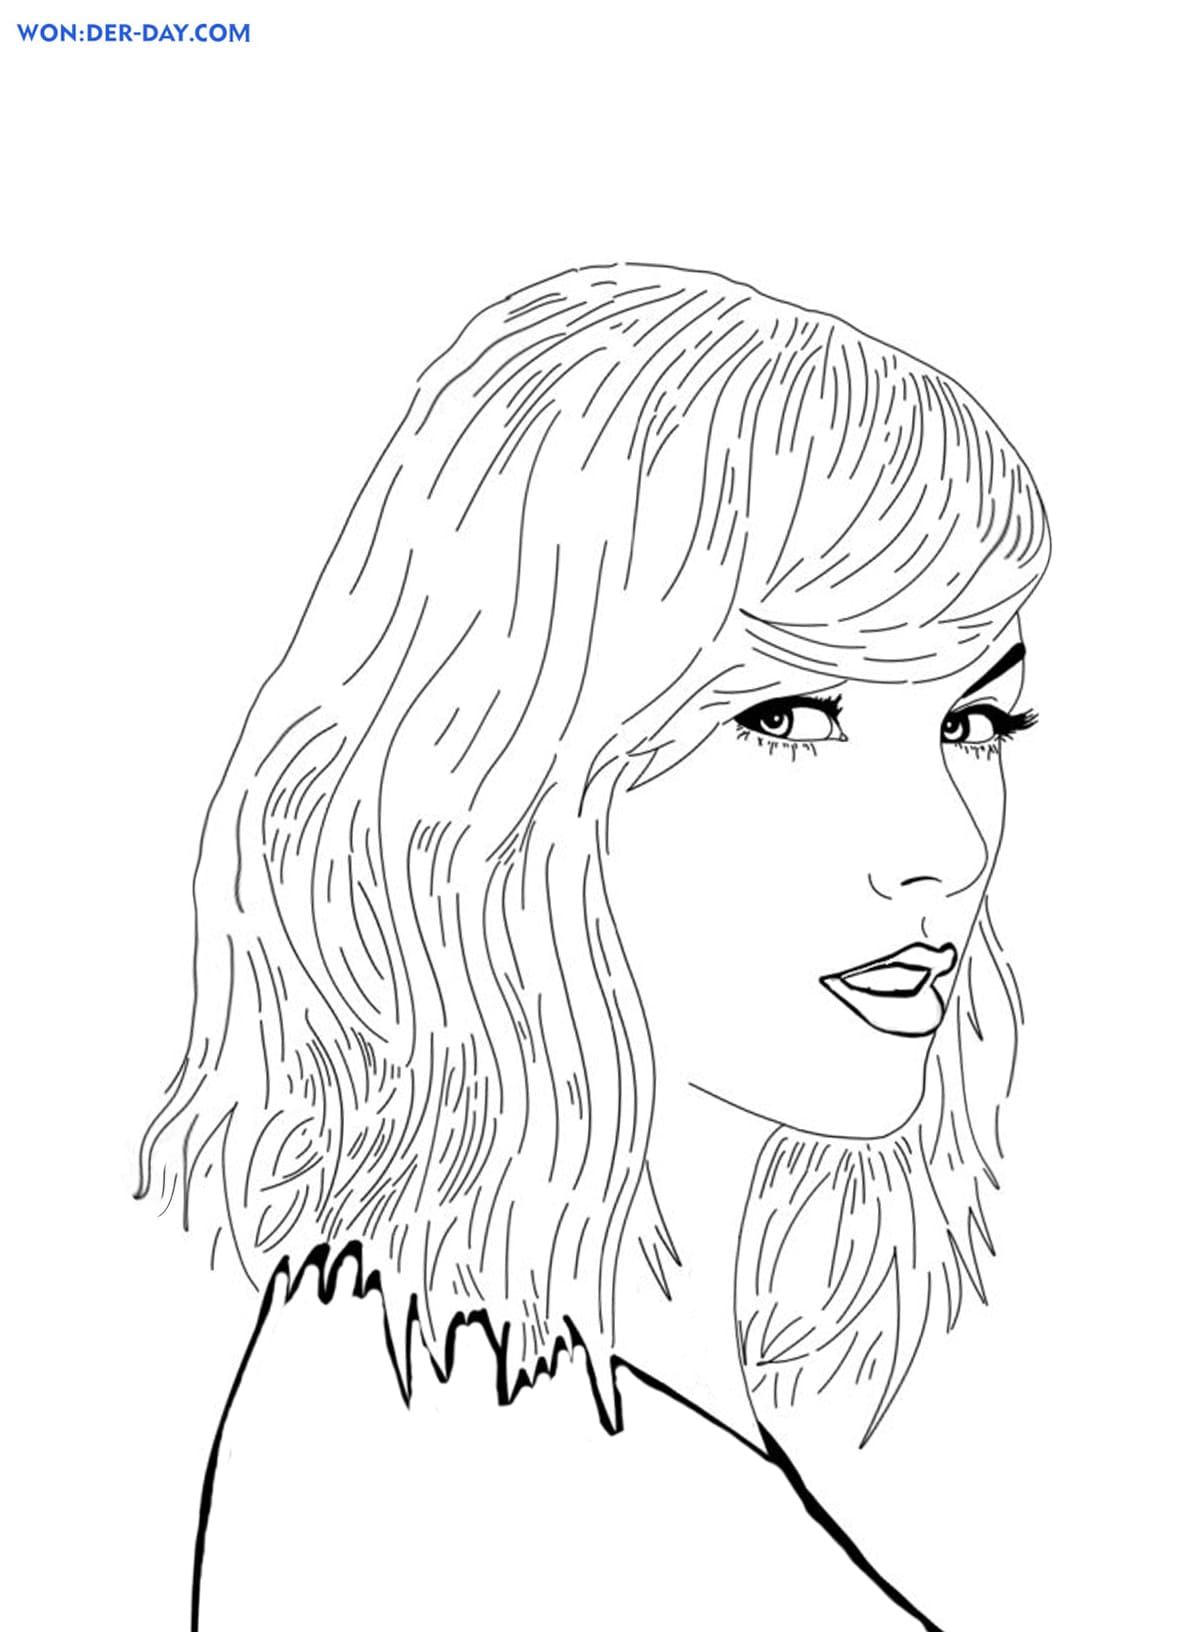 Taylor Swift Coloring Pages . Print for Free  WONDER DAY — Coloring pages  for children and adults